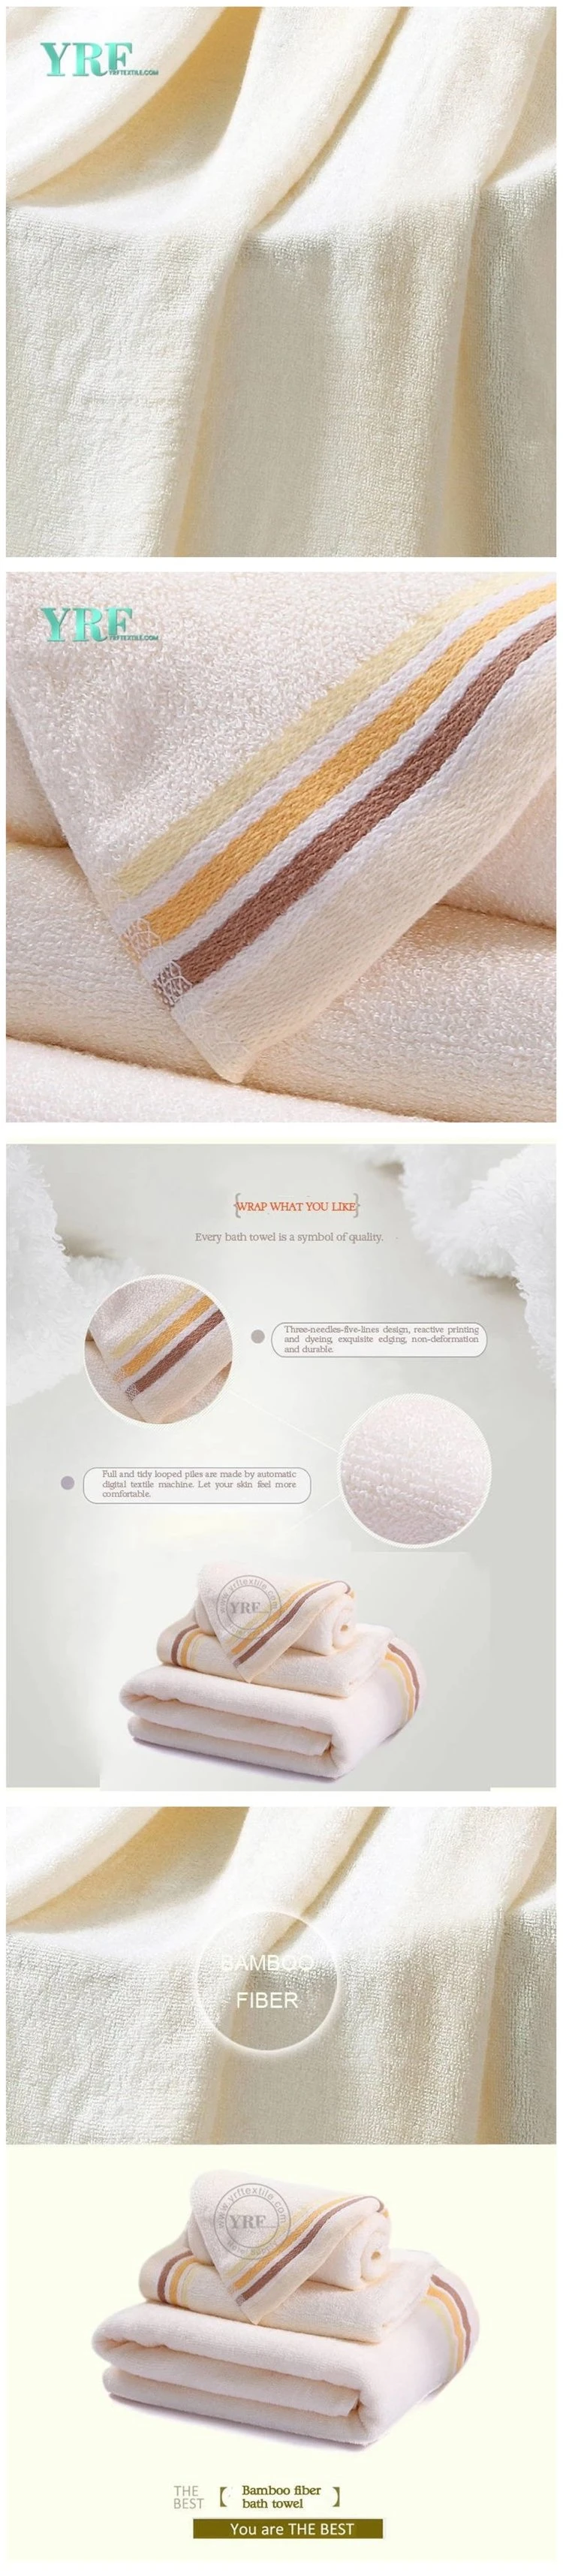 China Wholesale Very Soft and High Absorbent Microfibre Bamboo Bath Towel